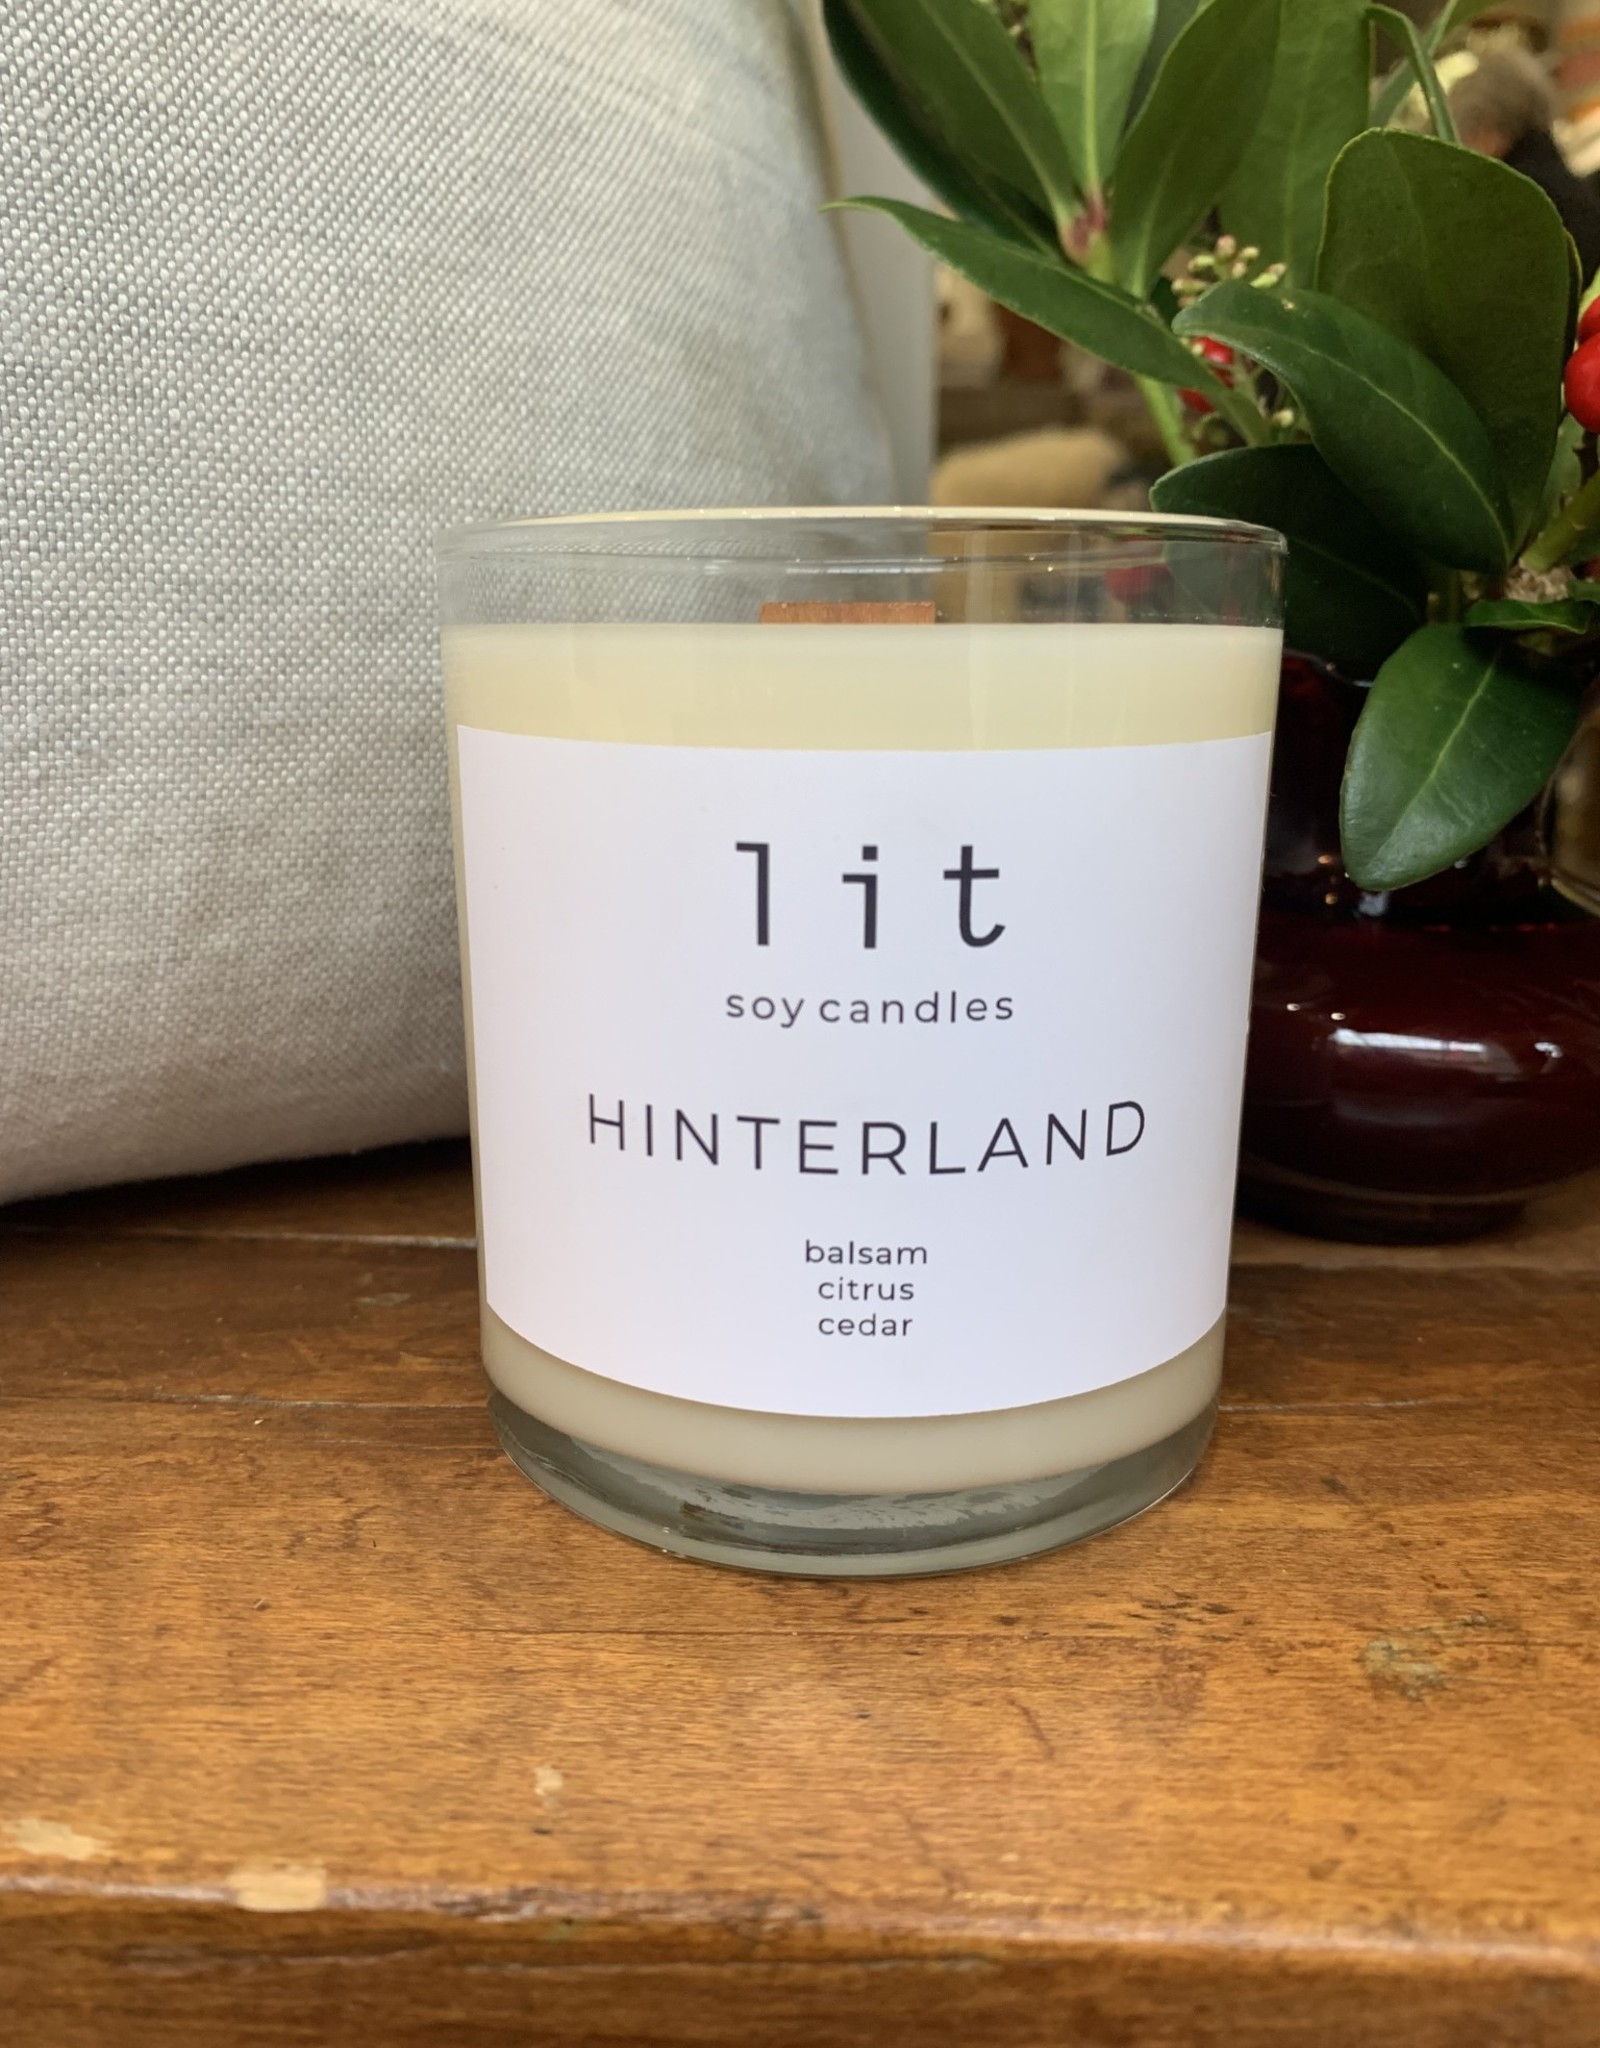 Lit Soy Candles Lit Soy Candles, Hinterland